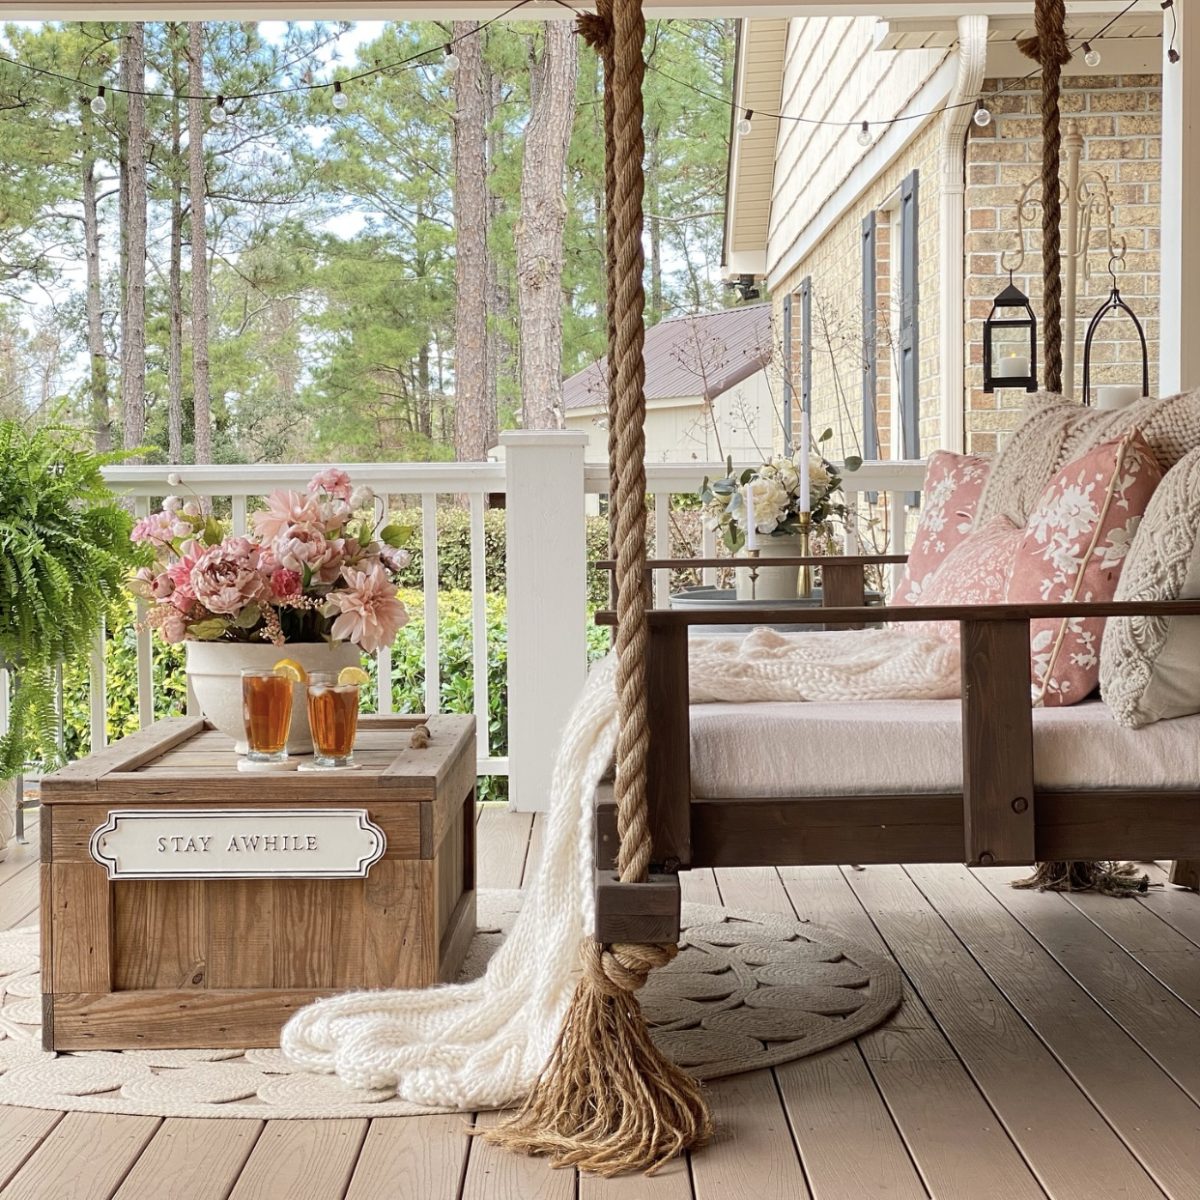 Front porch swing side view with a floral arrangement and iced tea on the coffee table in front of it.